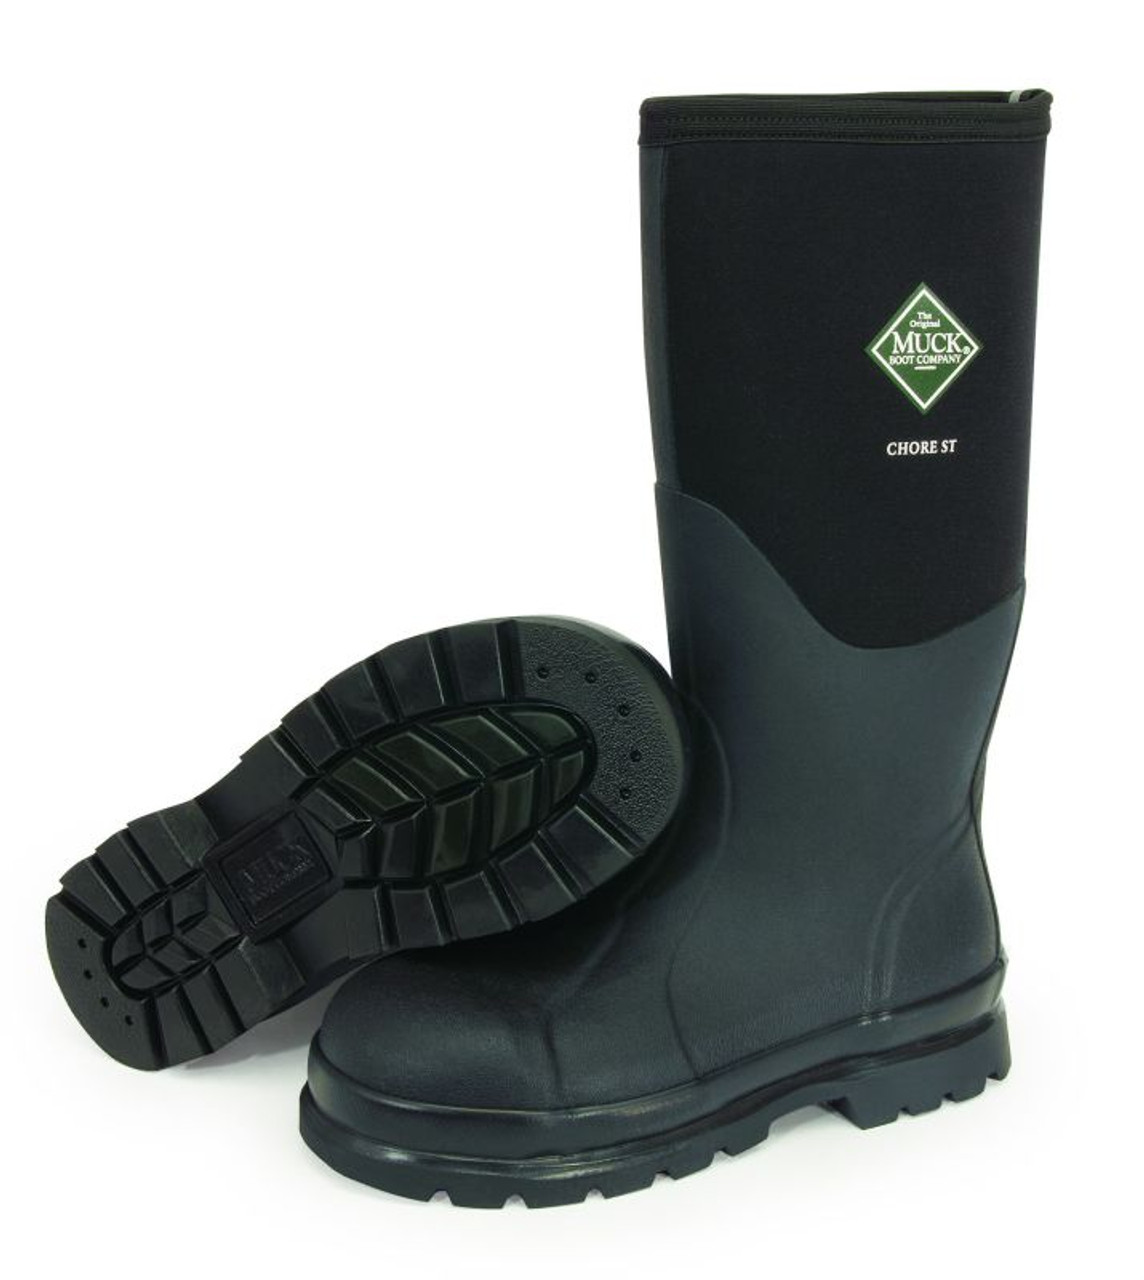 insulated muck boots steel toe